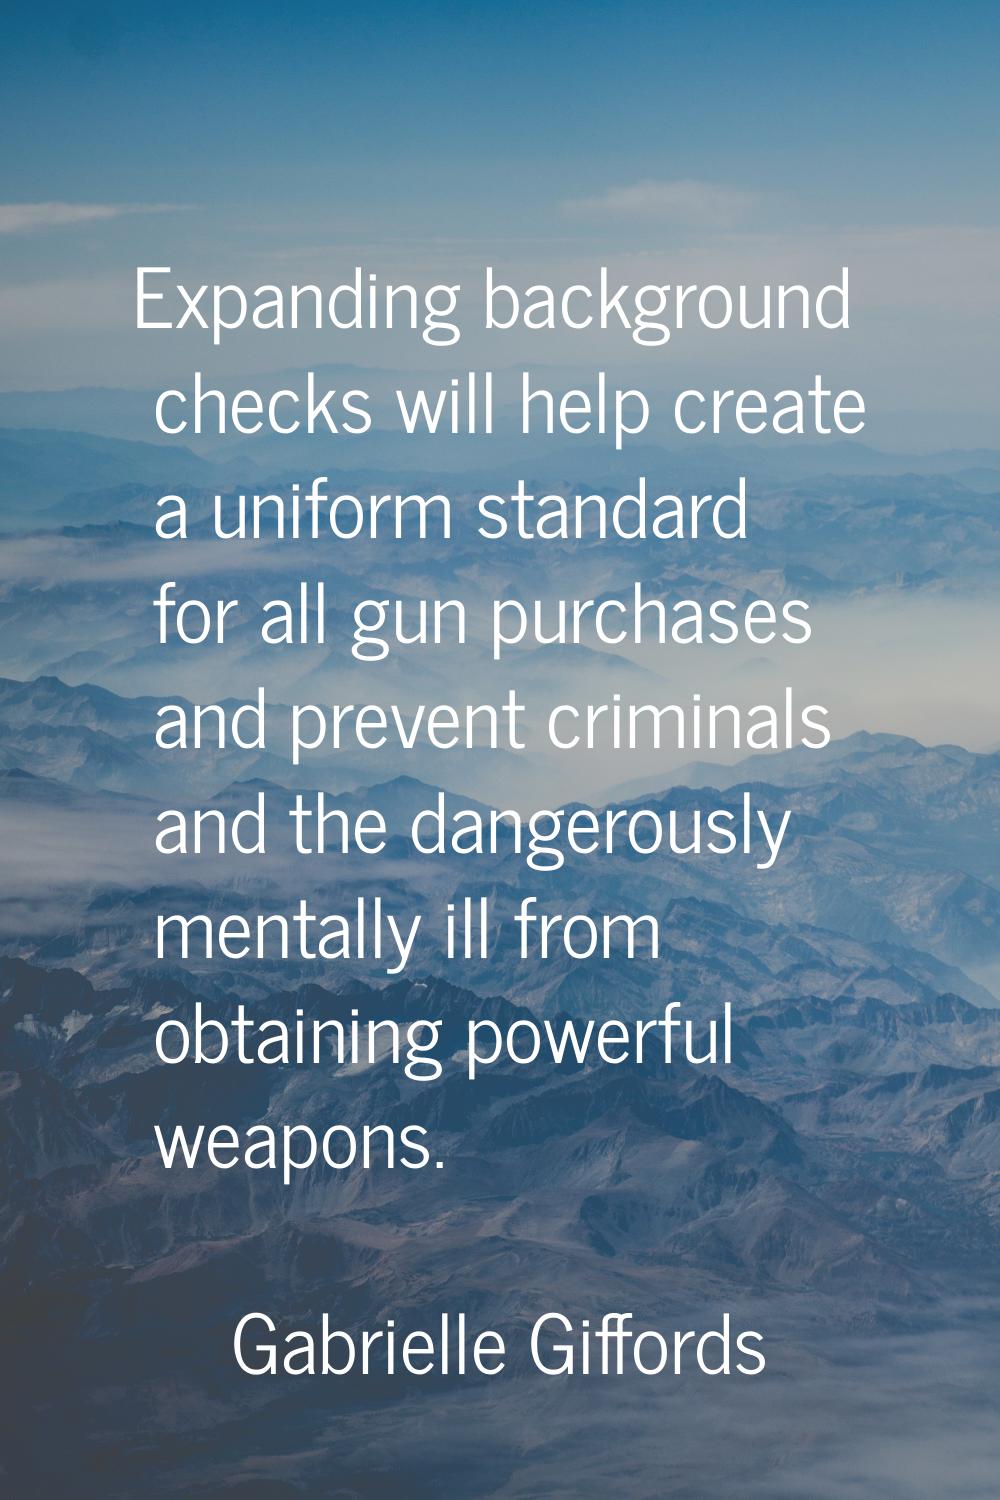 Expanding background checks will help create a uniform standard for all gun purchases and prevent c